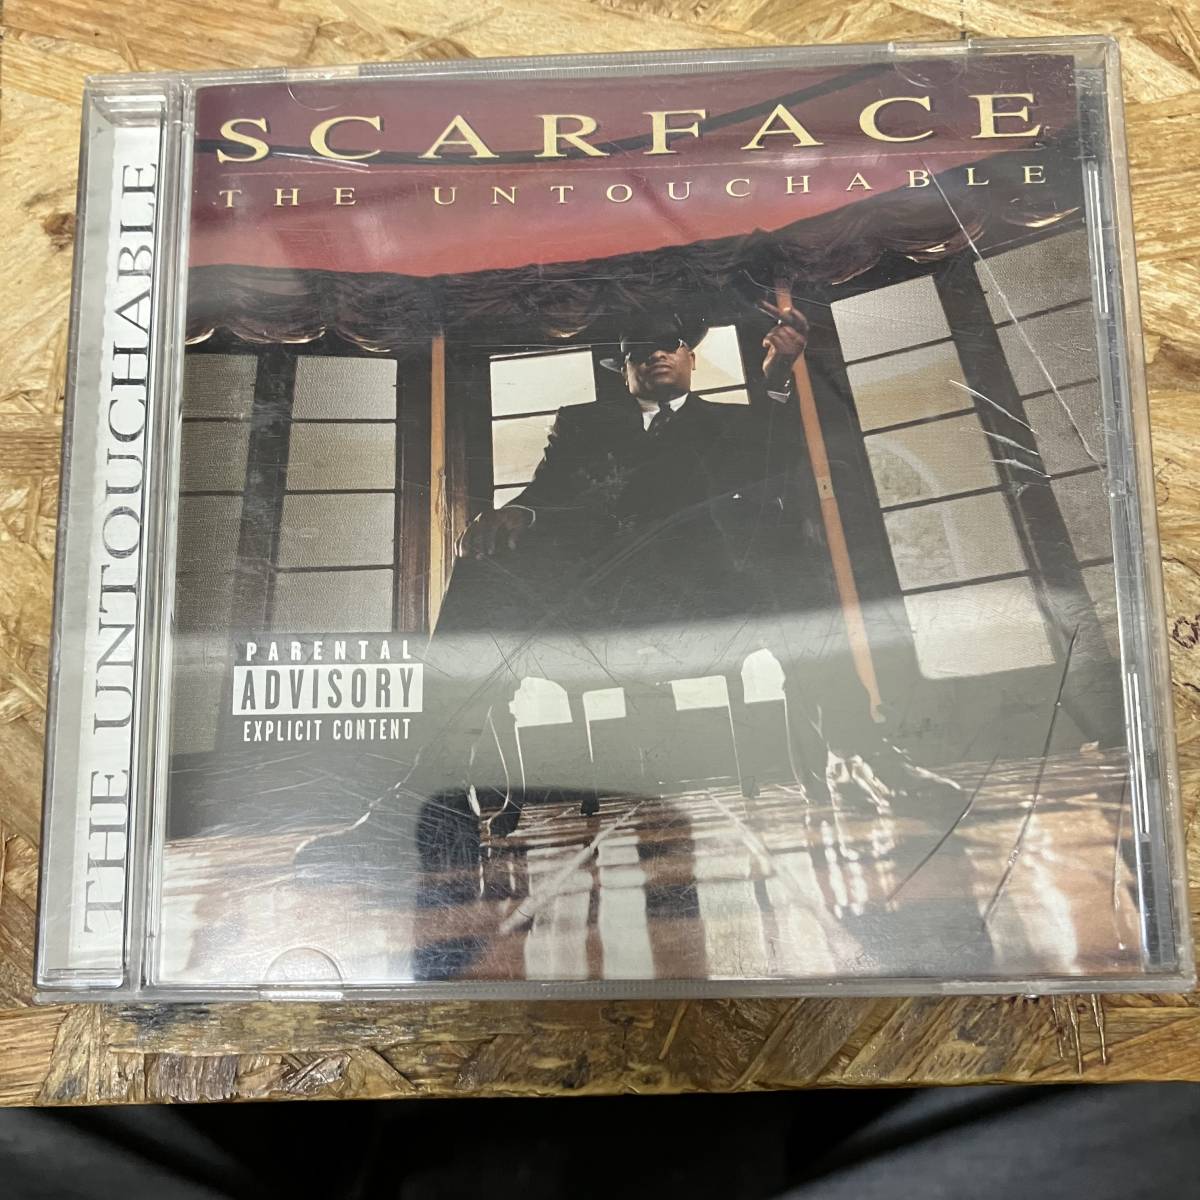 ● HIPHOP,R&B SCARFACE - THE UNTOUCHABLE アルバム,名作! CD 中古品_画像1